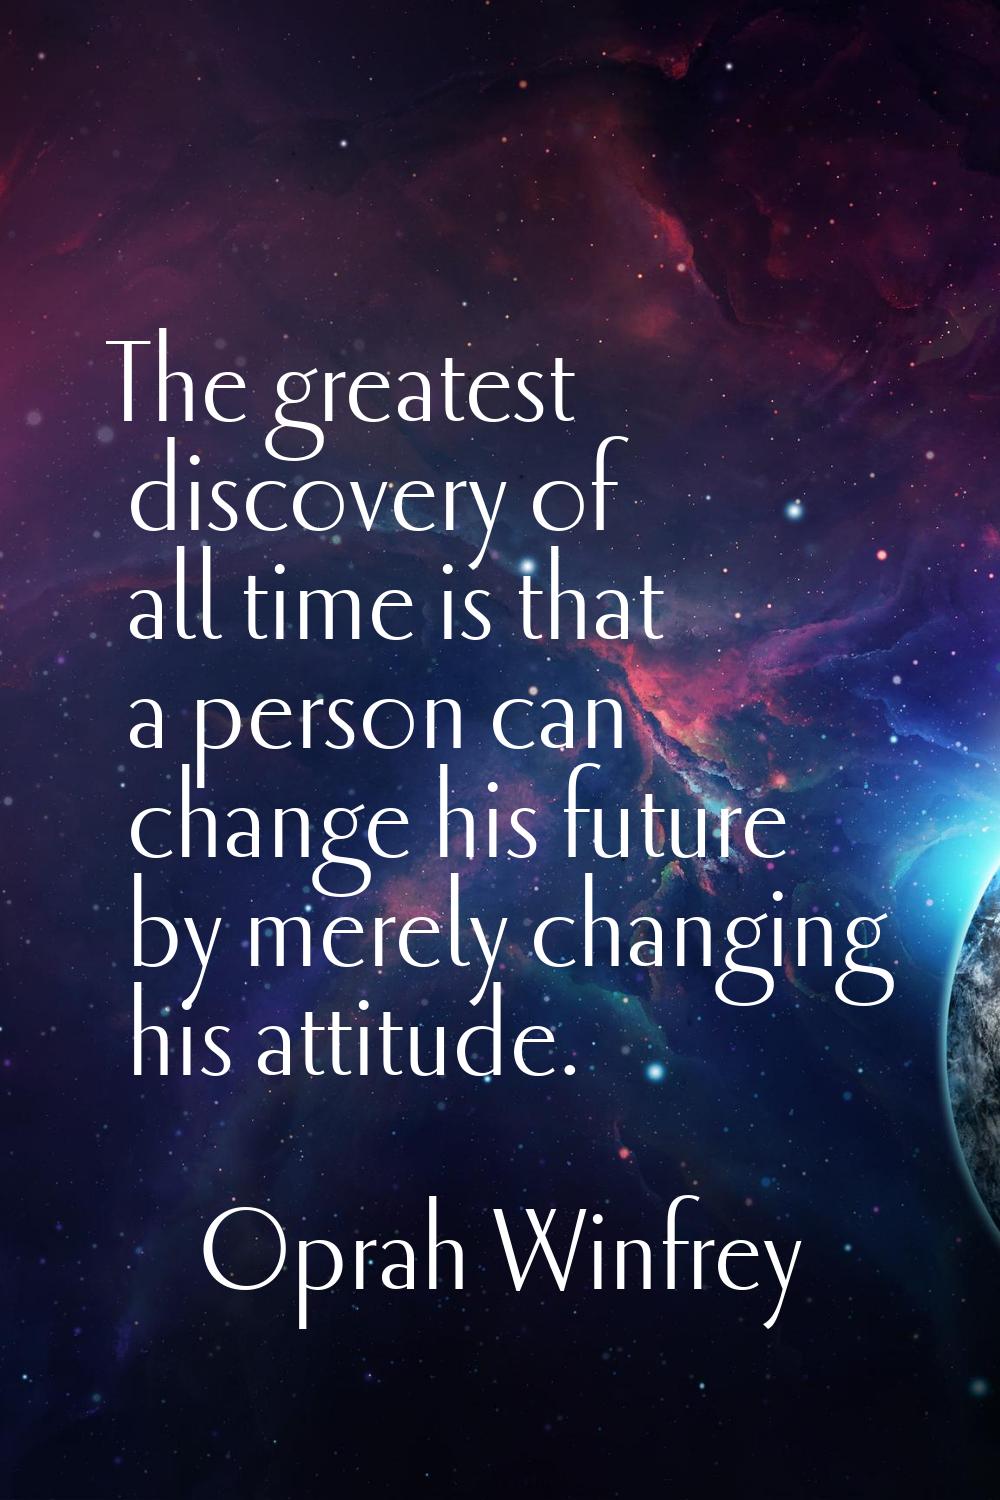 The greatest discovery of all time is that a person can change his future by merely changing his at